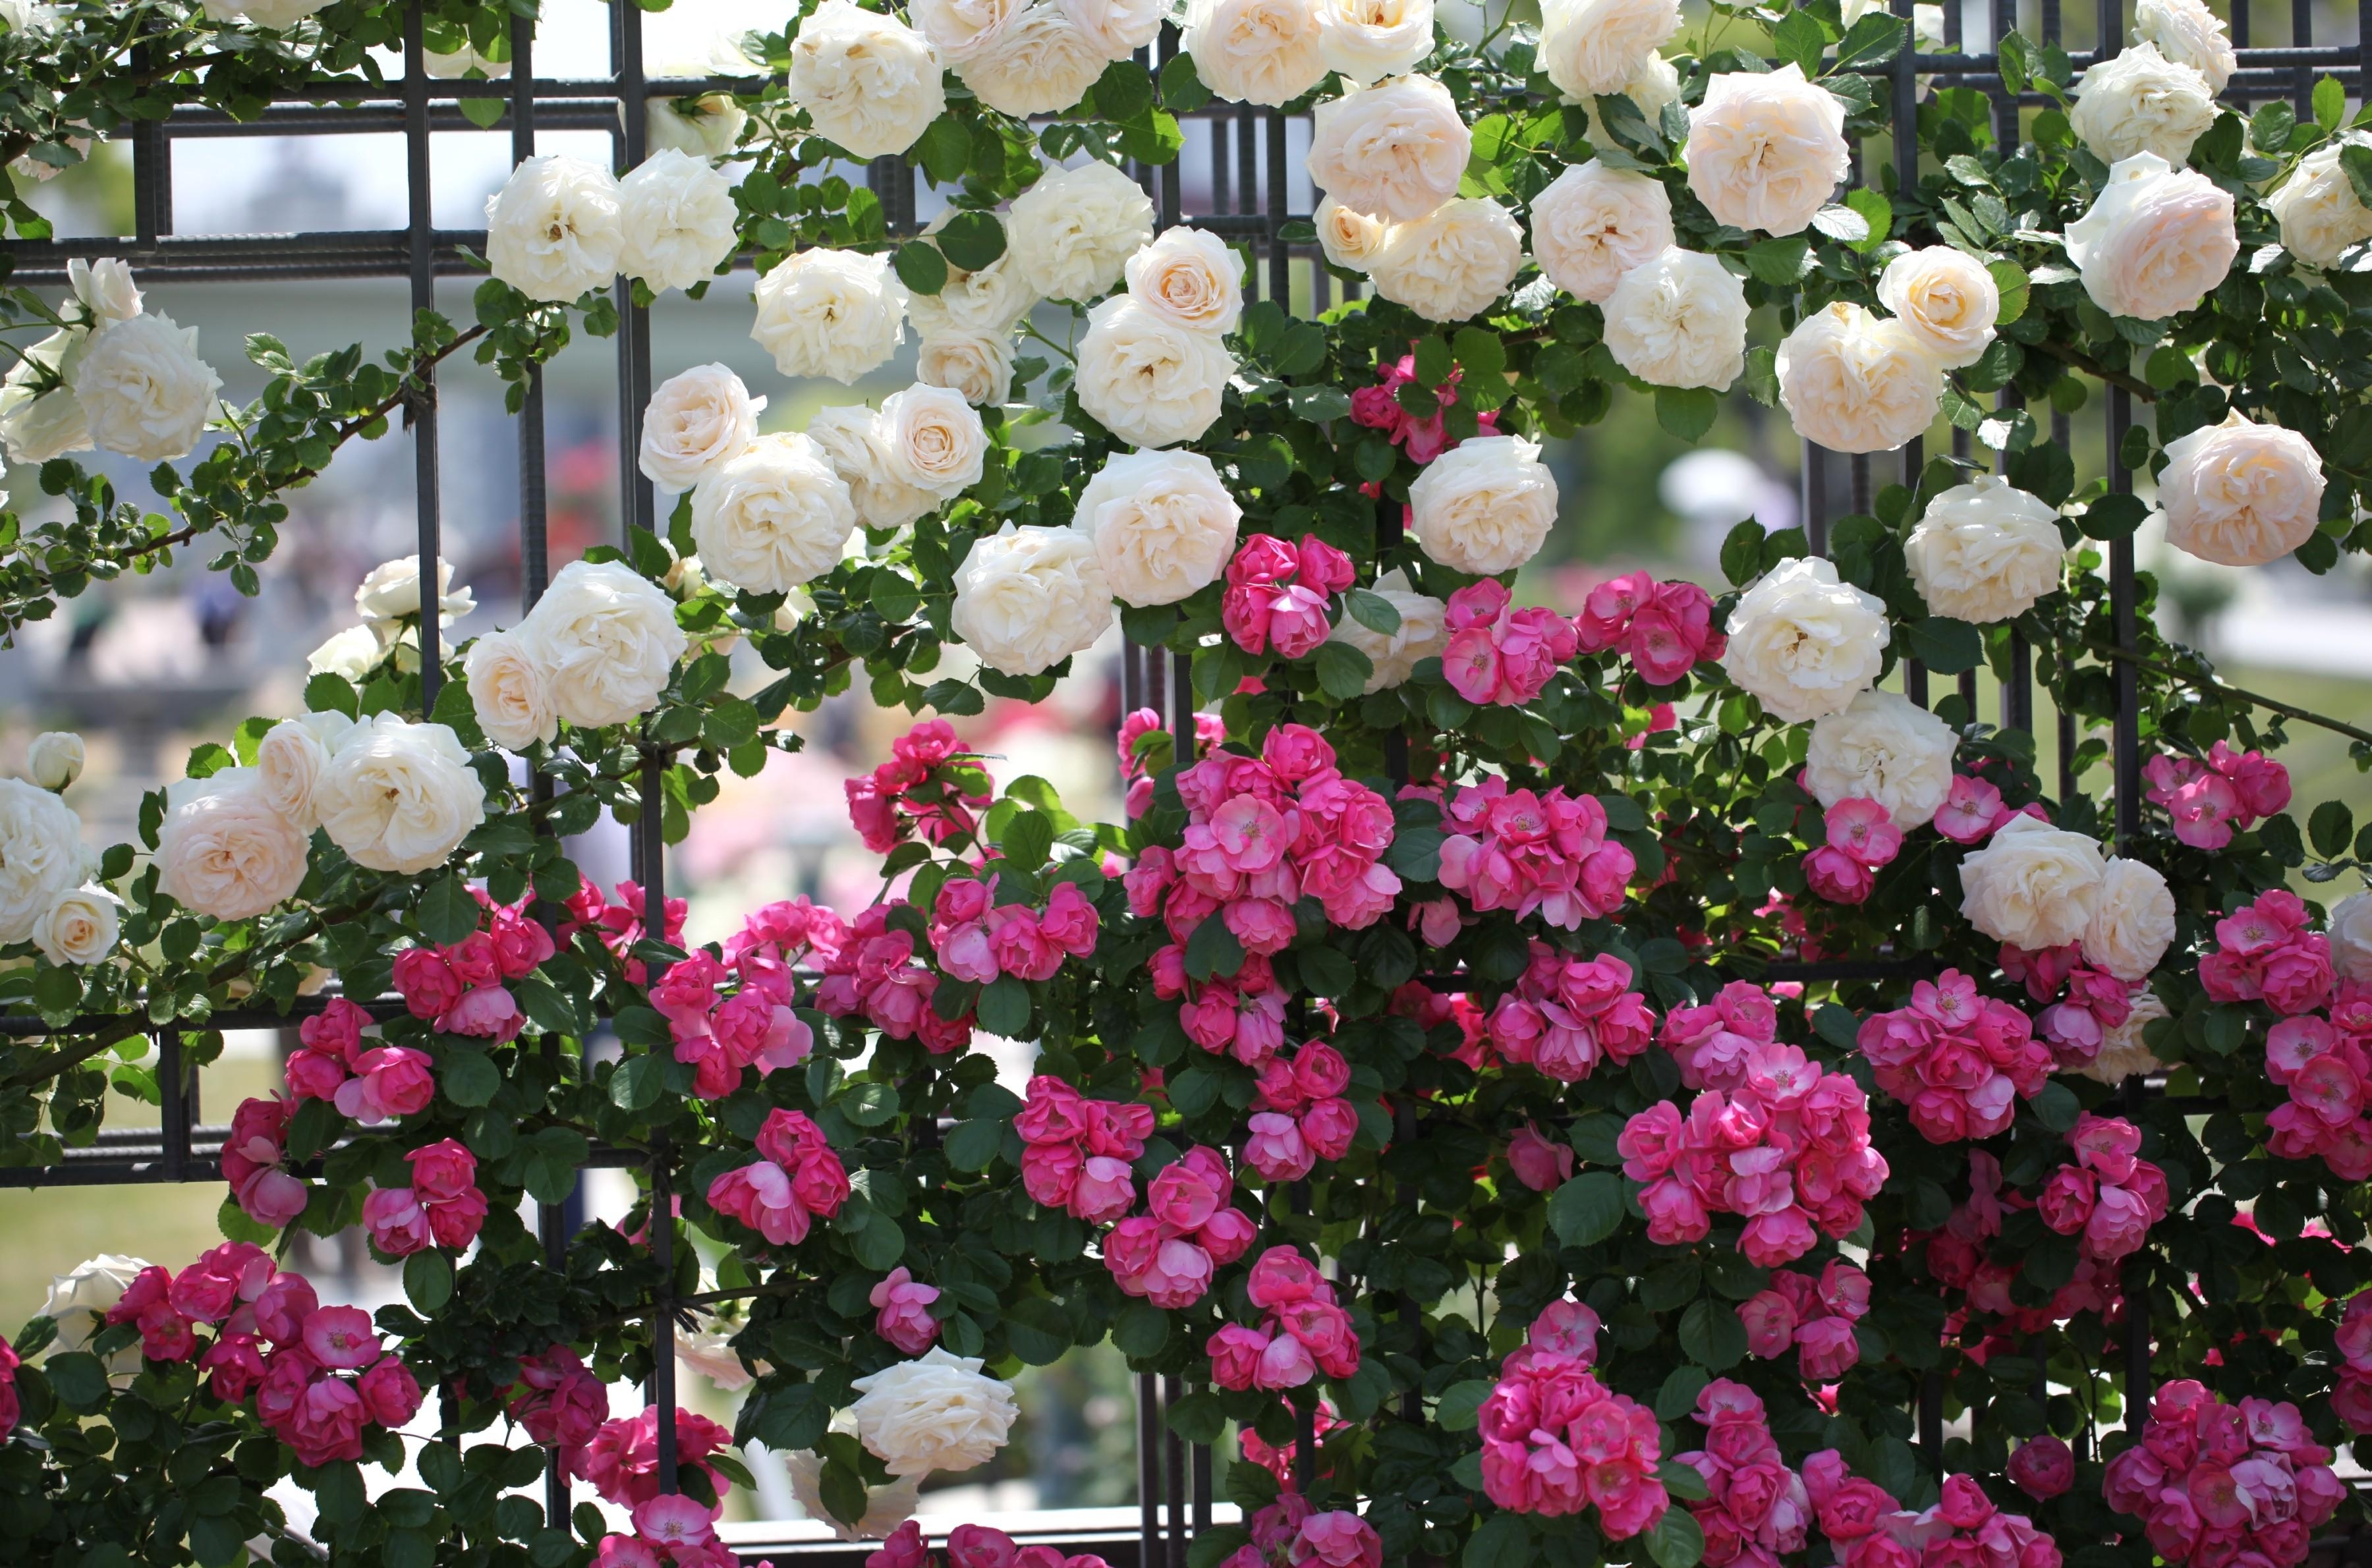 roses, flowers, it's beautiful, greens, fence, handsomely, different phone wallpaper